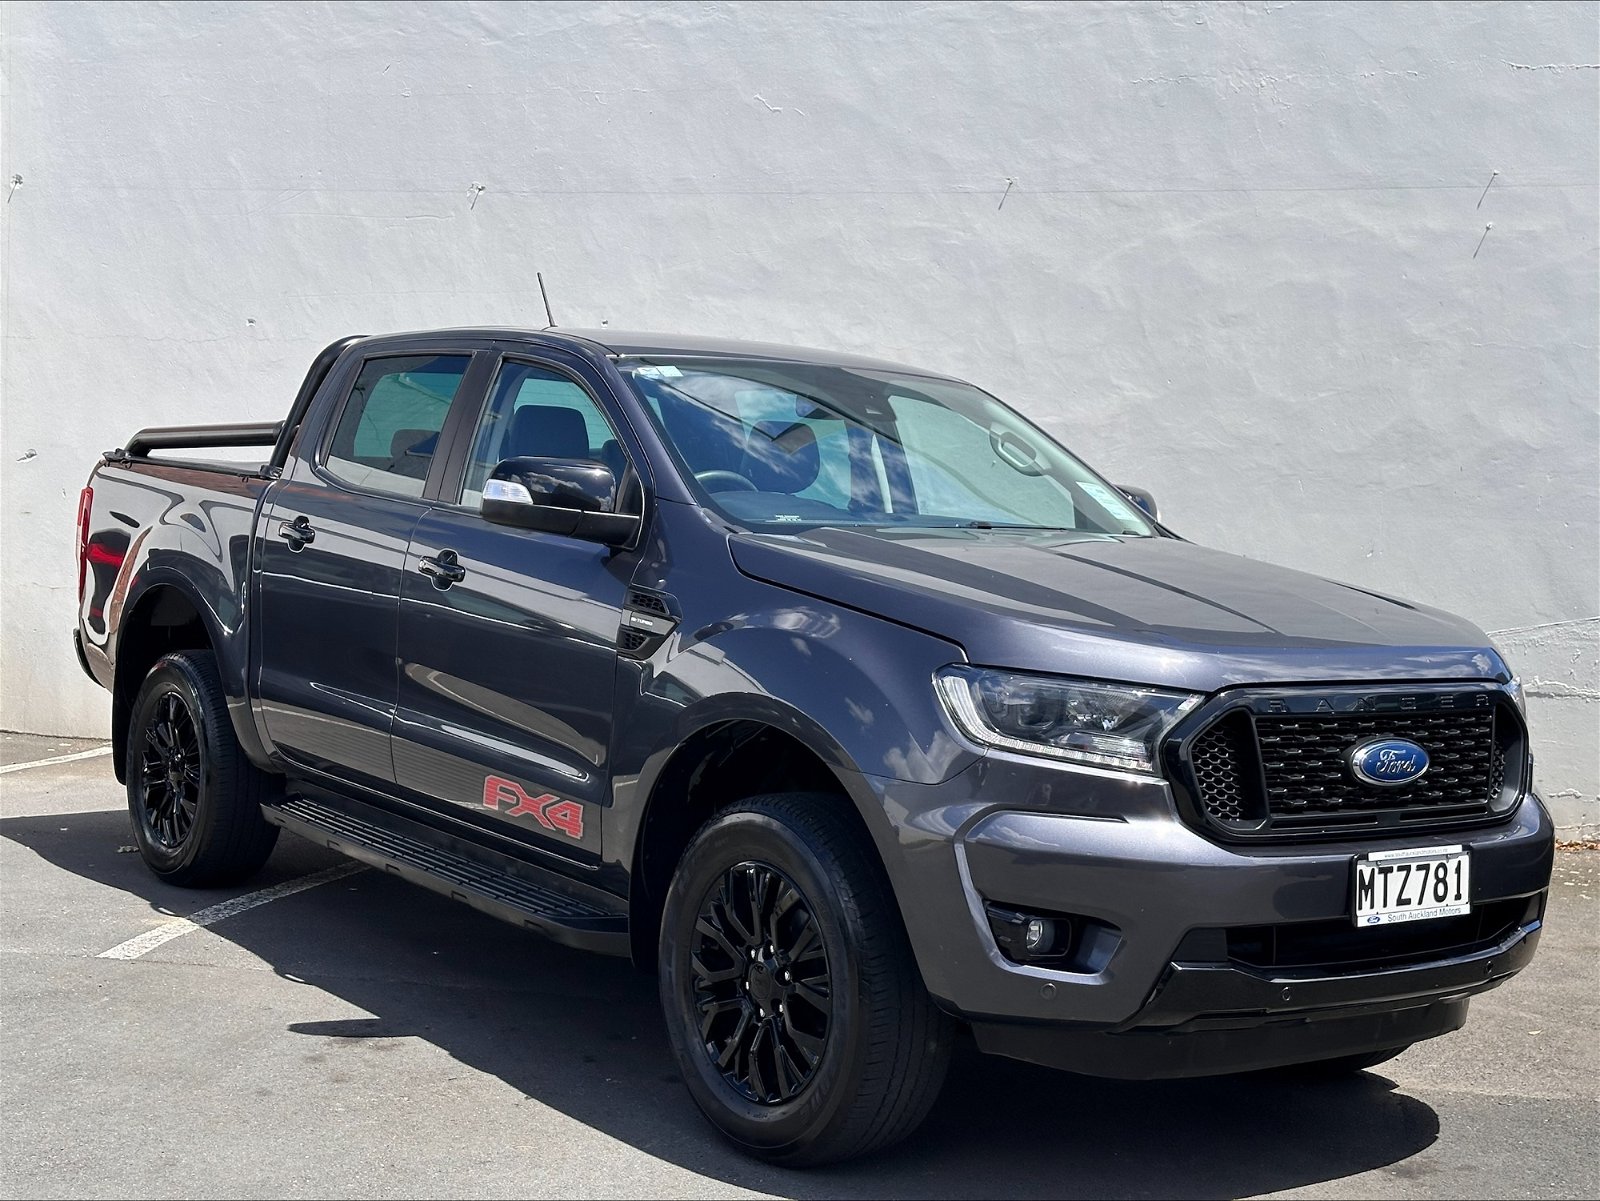 2020 Ford Ranger FX4 4x2 Double Cab